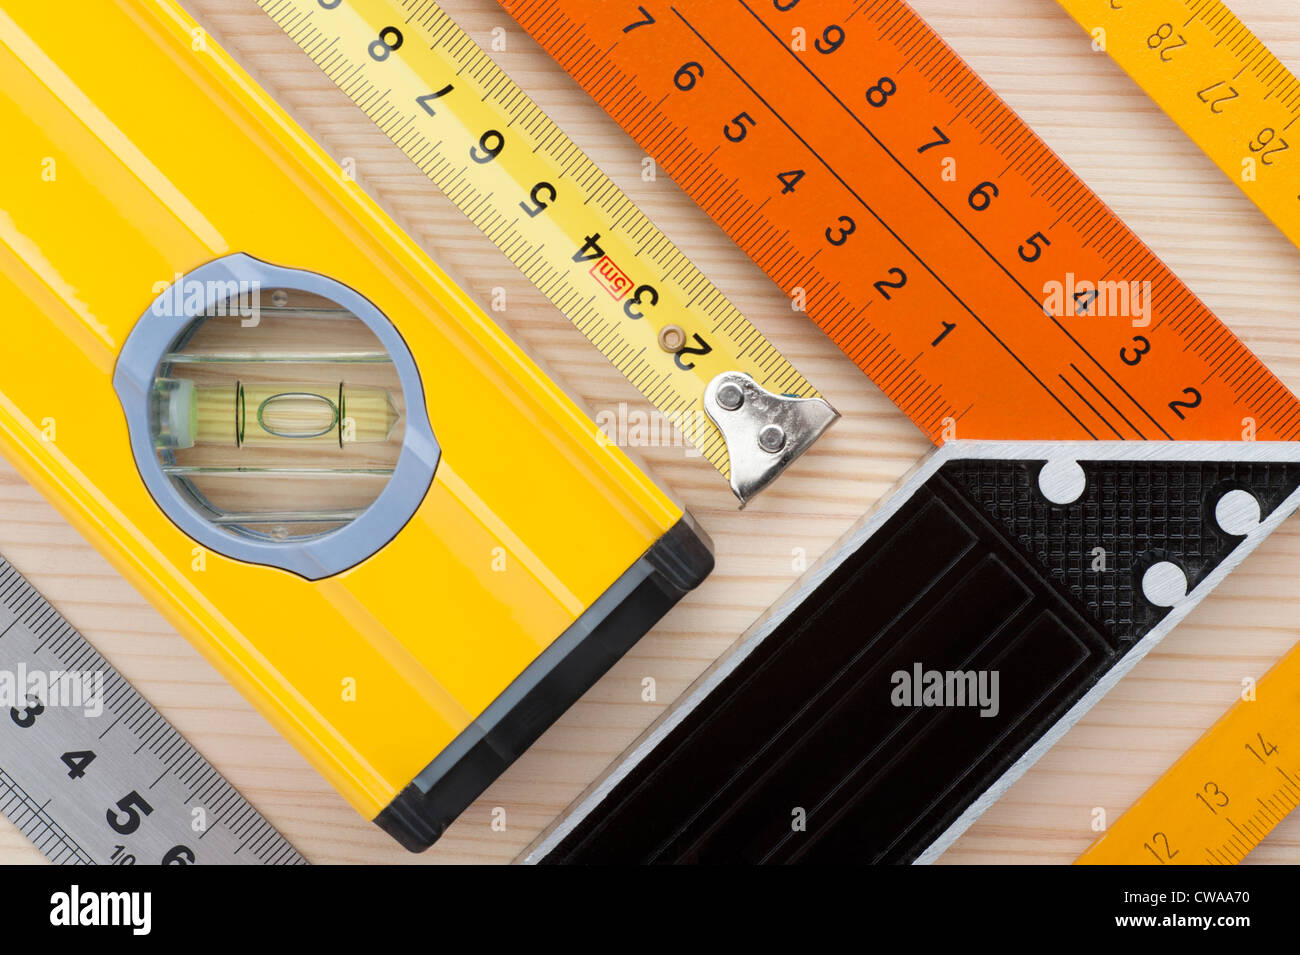 Assorted measurement tools, arranged on wooden surface, as an abstract background Stock Photo